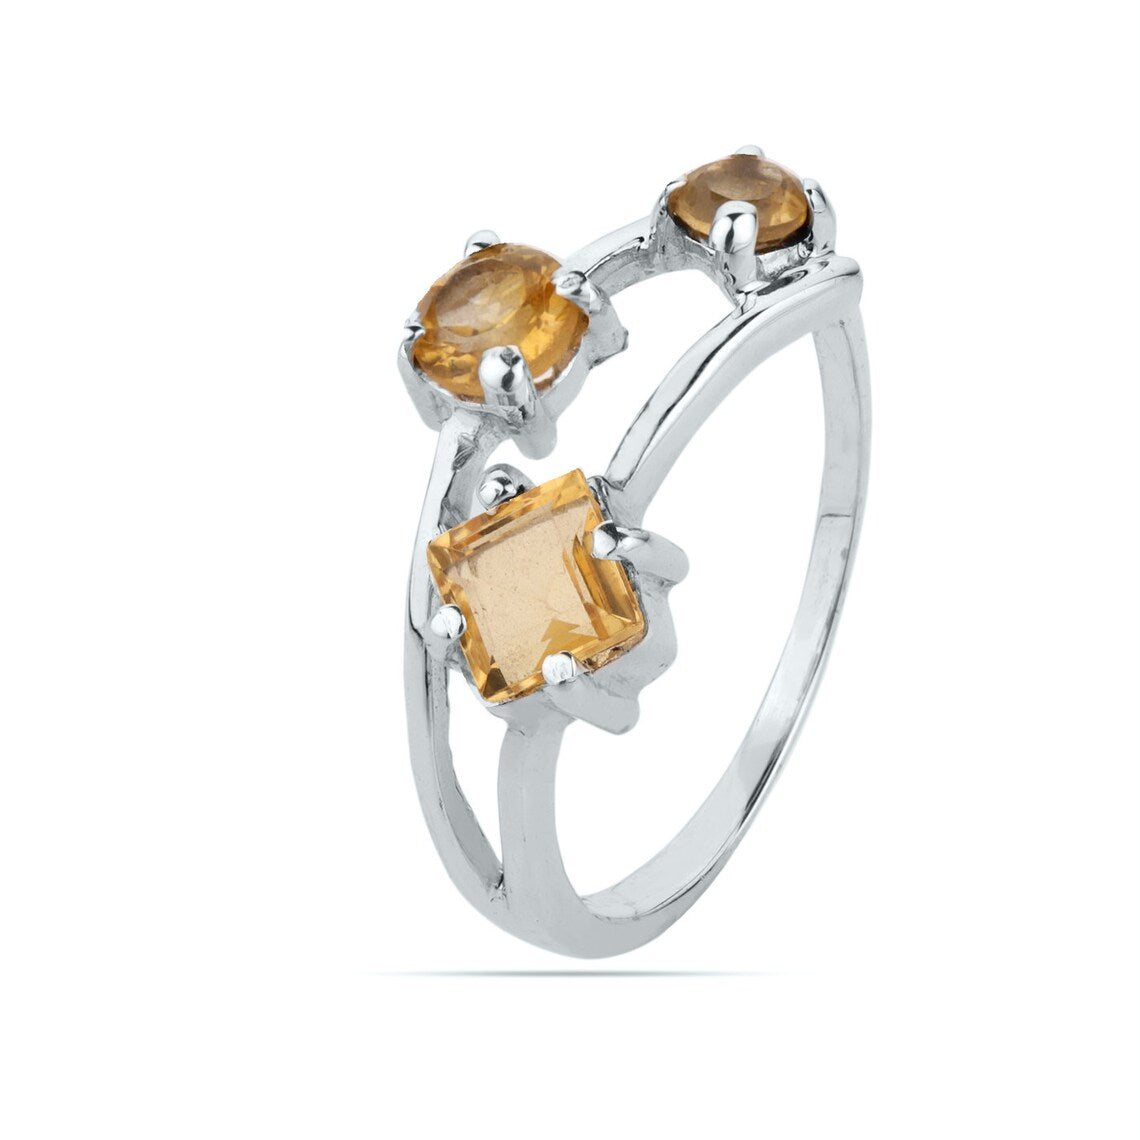 Citirne Ring, Yellow Citrine Ring, Citrine Prong Ring, Multi Citrine Ring, Gift For Her, Everyday Ring, Gift, Round Citrine Silver Ring